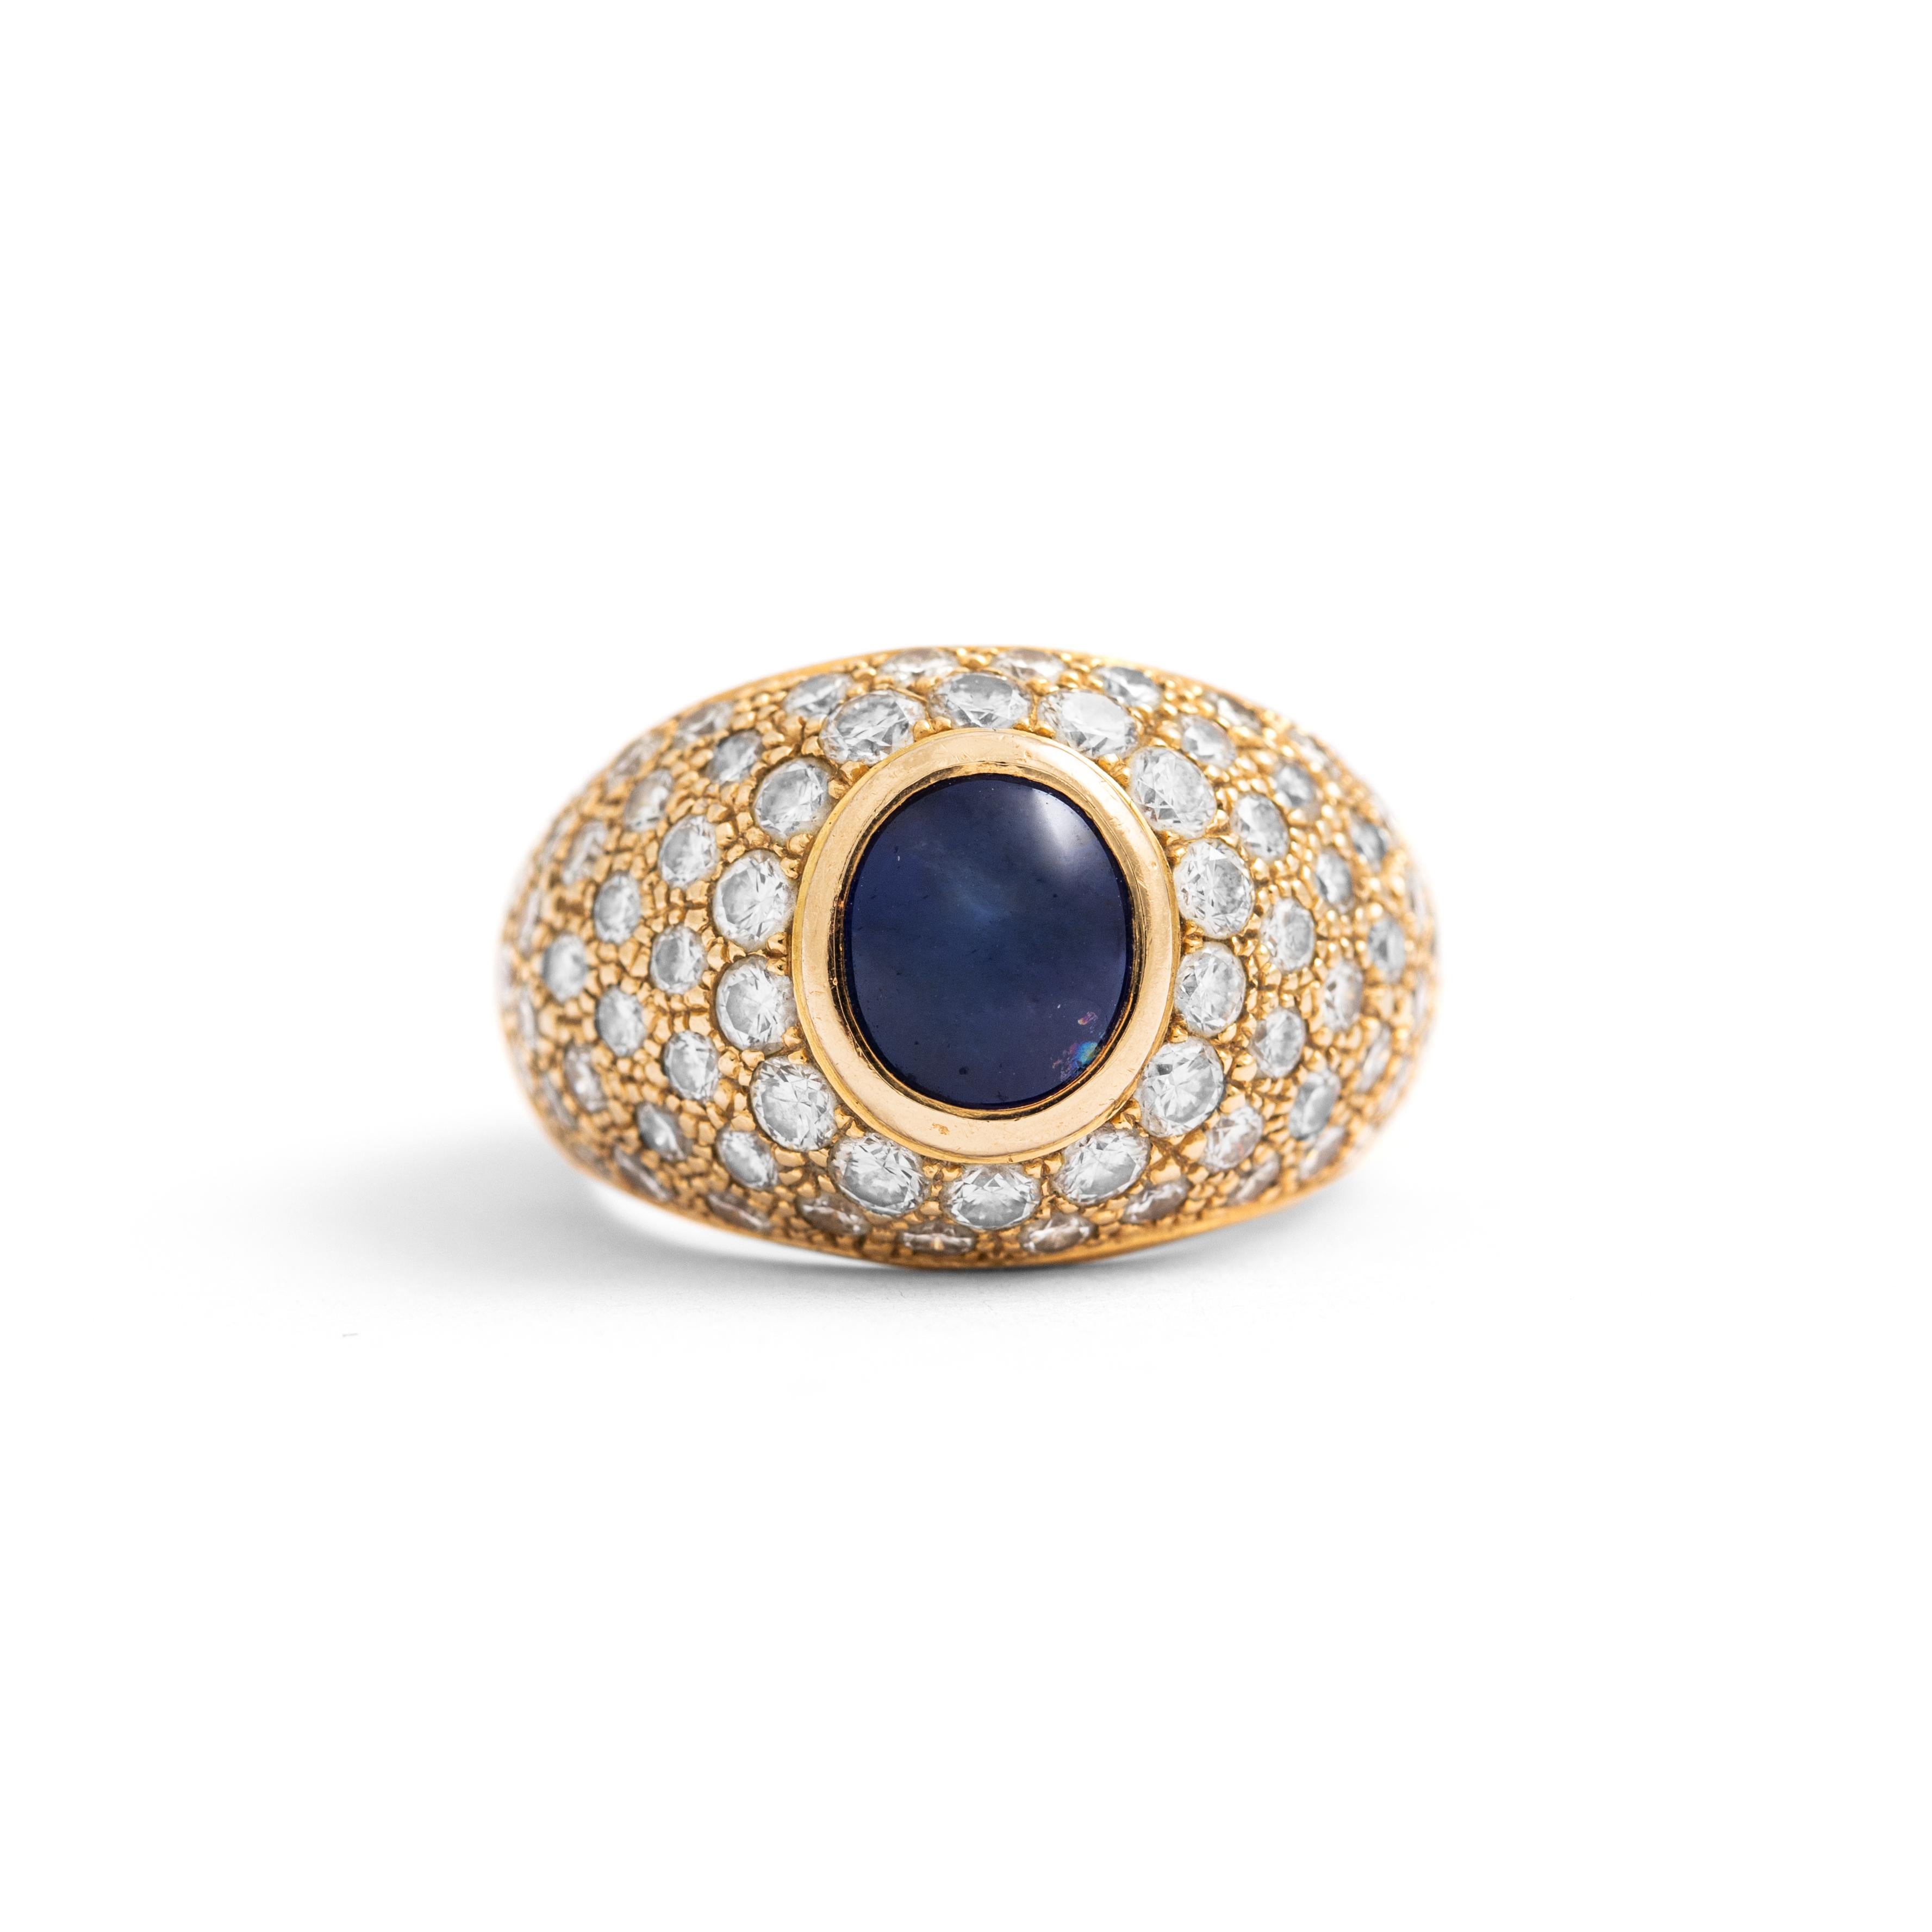 Sapphire Diamond Yellow Gold 18K Ring.
Sapphire cabochon (not tested): 8 x 7 x 5.80 mm.
Diamond: Approximately 1.20 / 1.70 carat.
Total weight: 16.37 grams.
Size: 54 / 6.75 US.